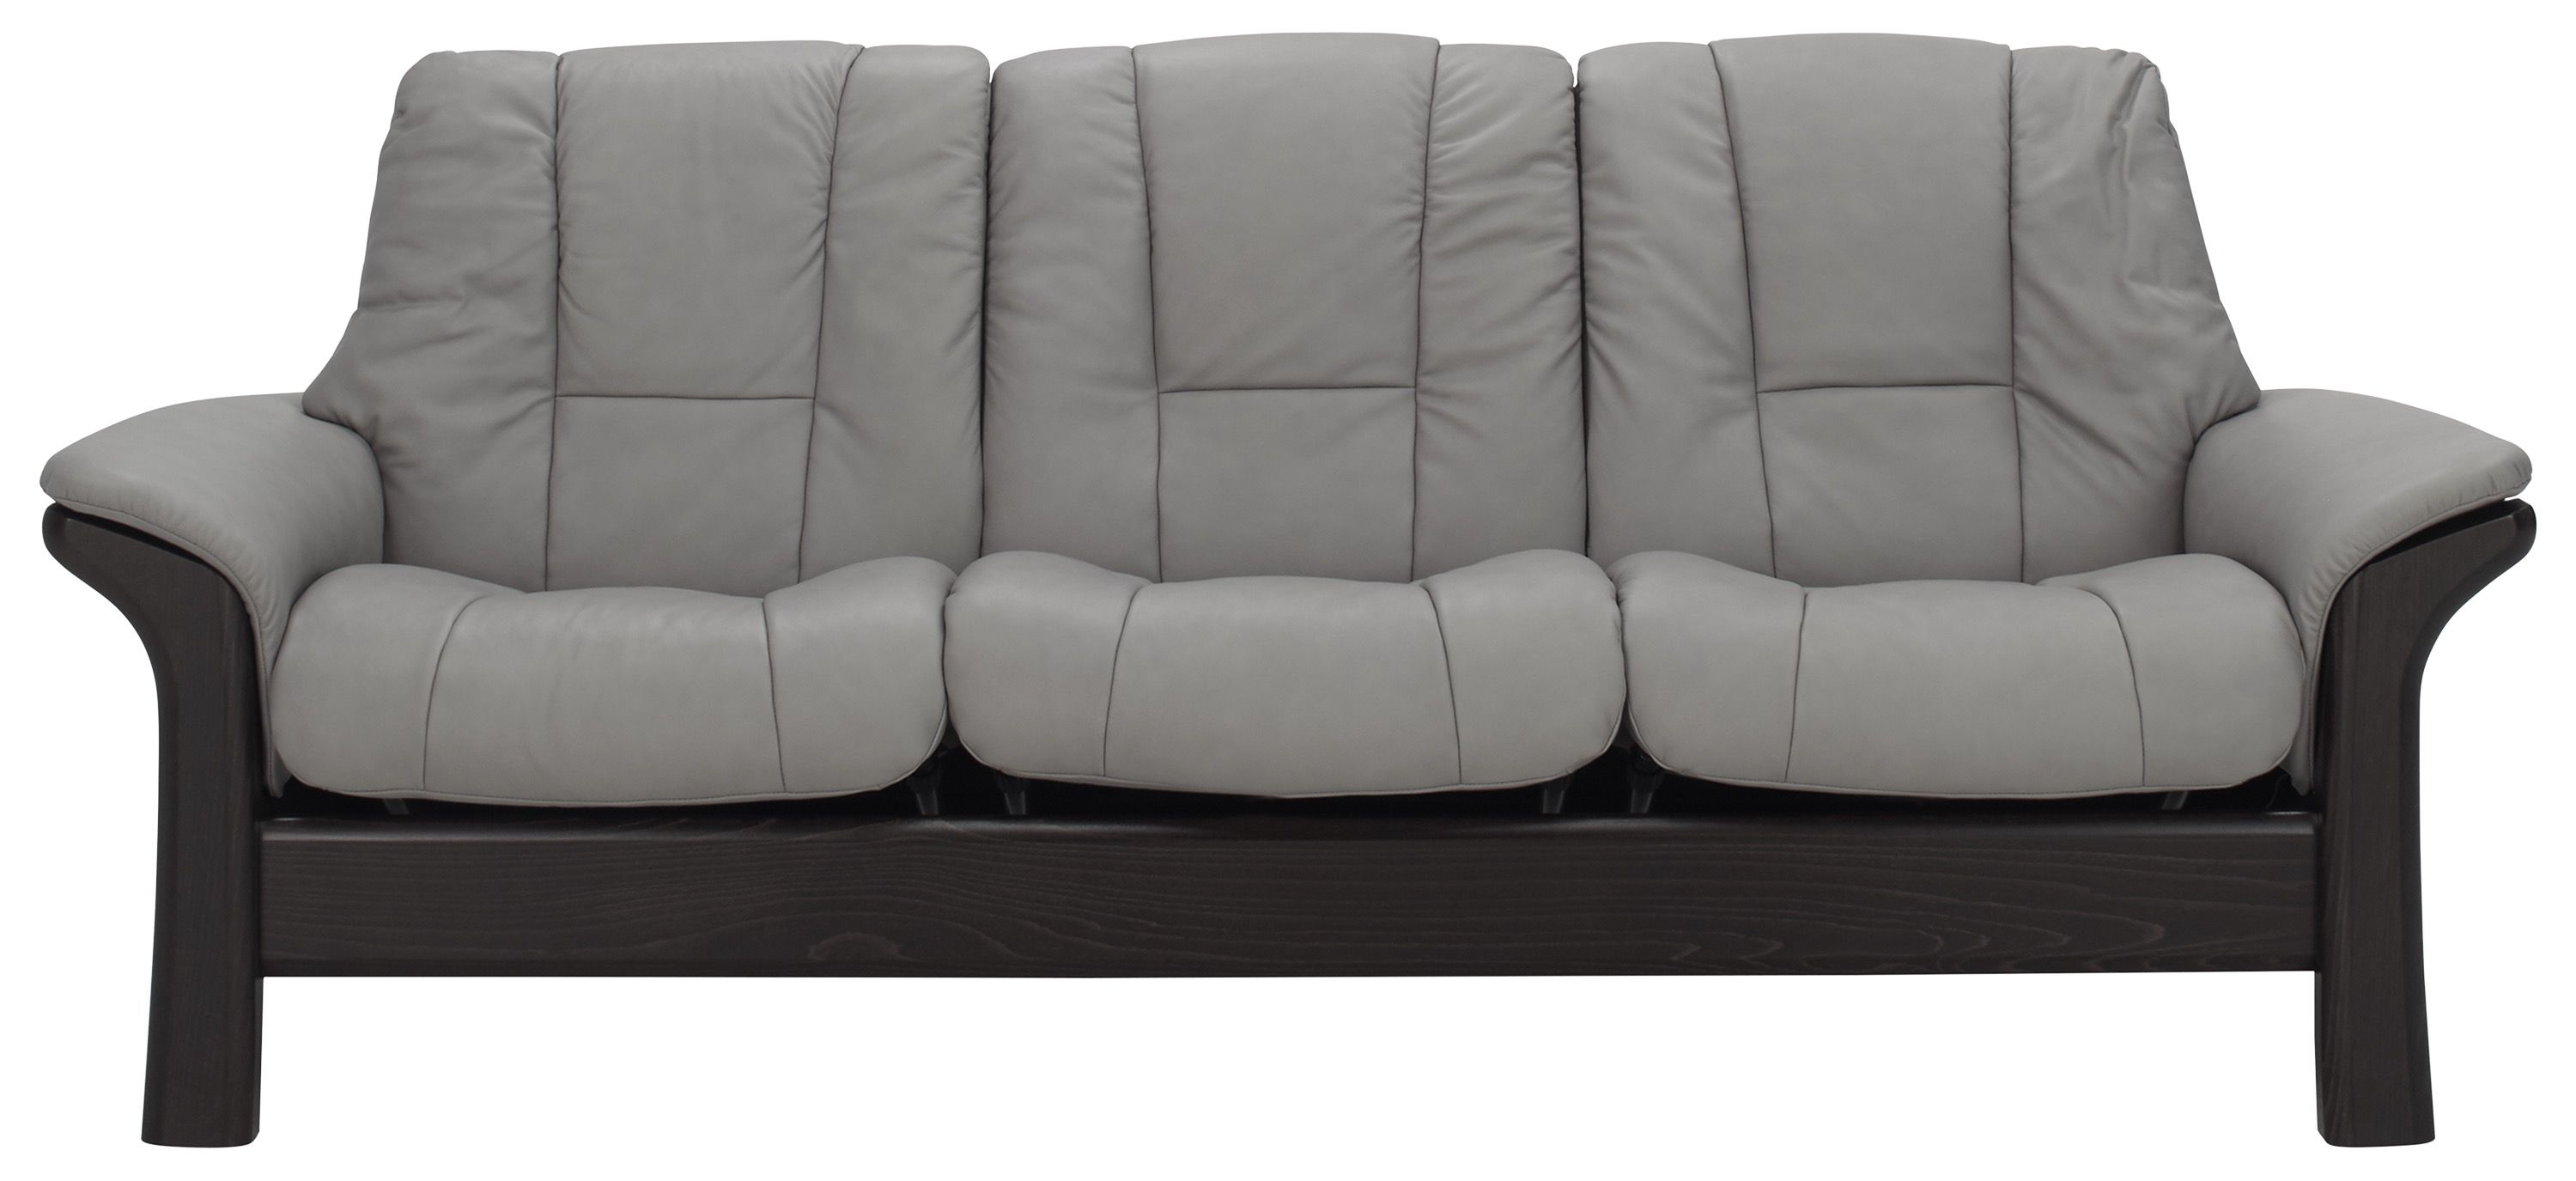 Stressless Windsor Leather Reclining Low-Back Sofa